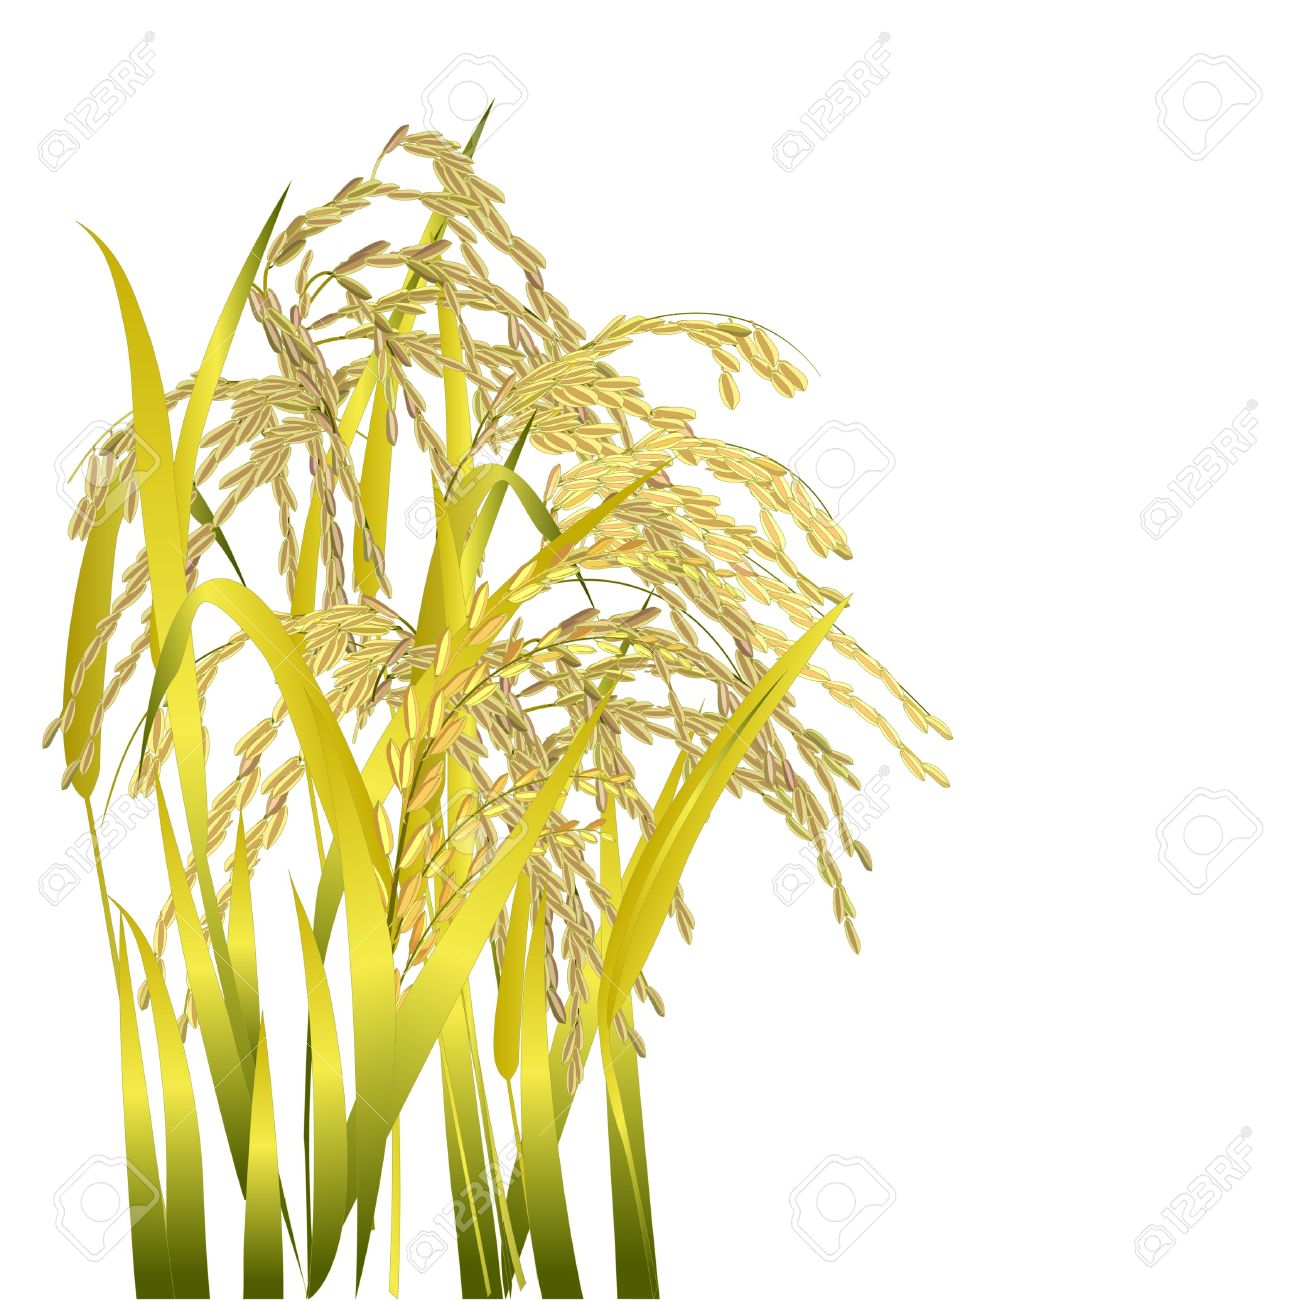 Crops clipart palay. Station 